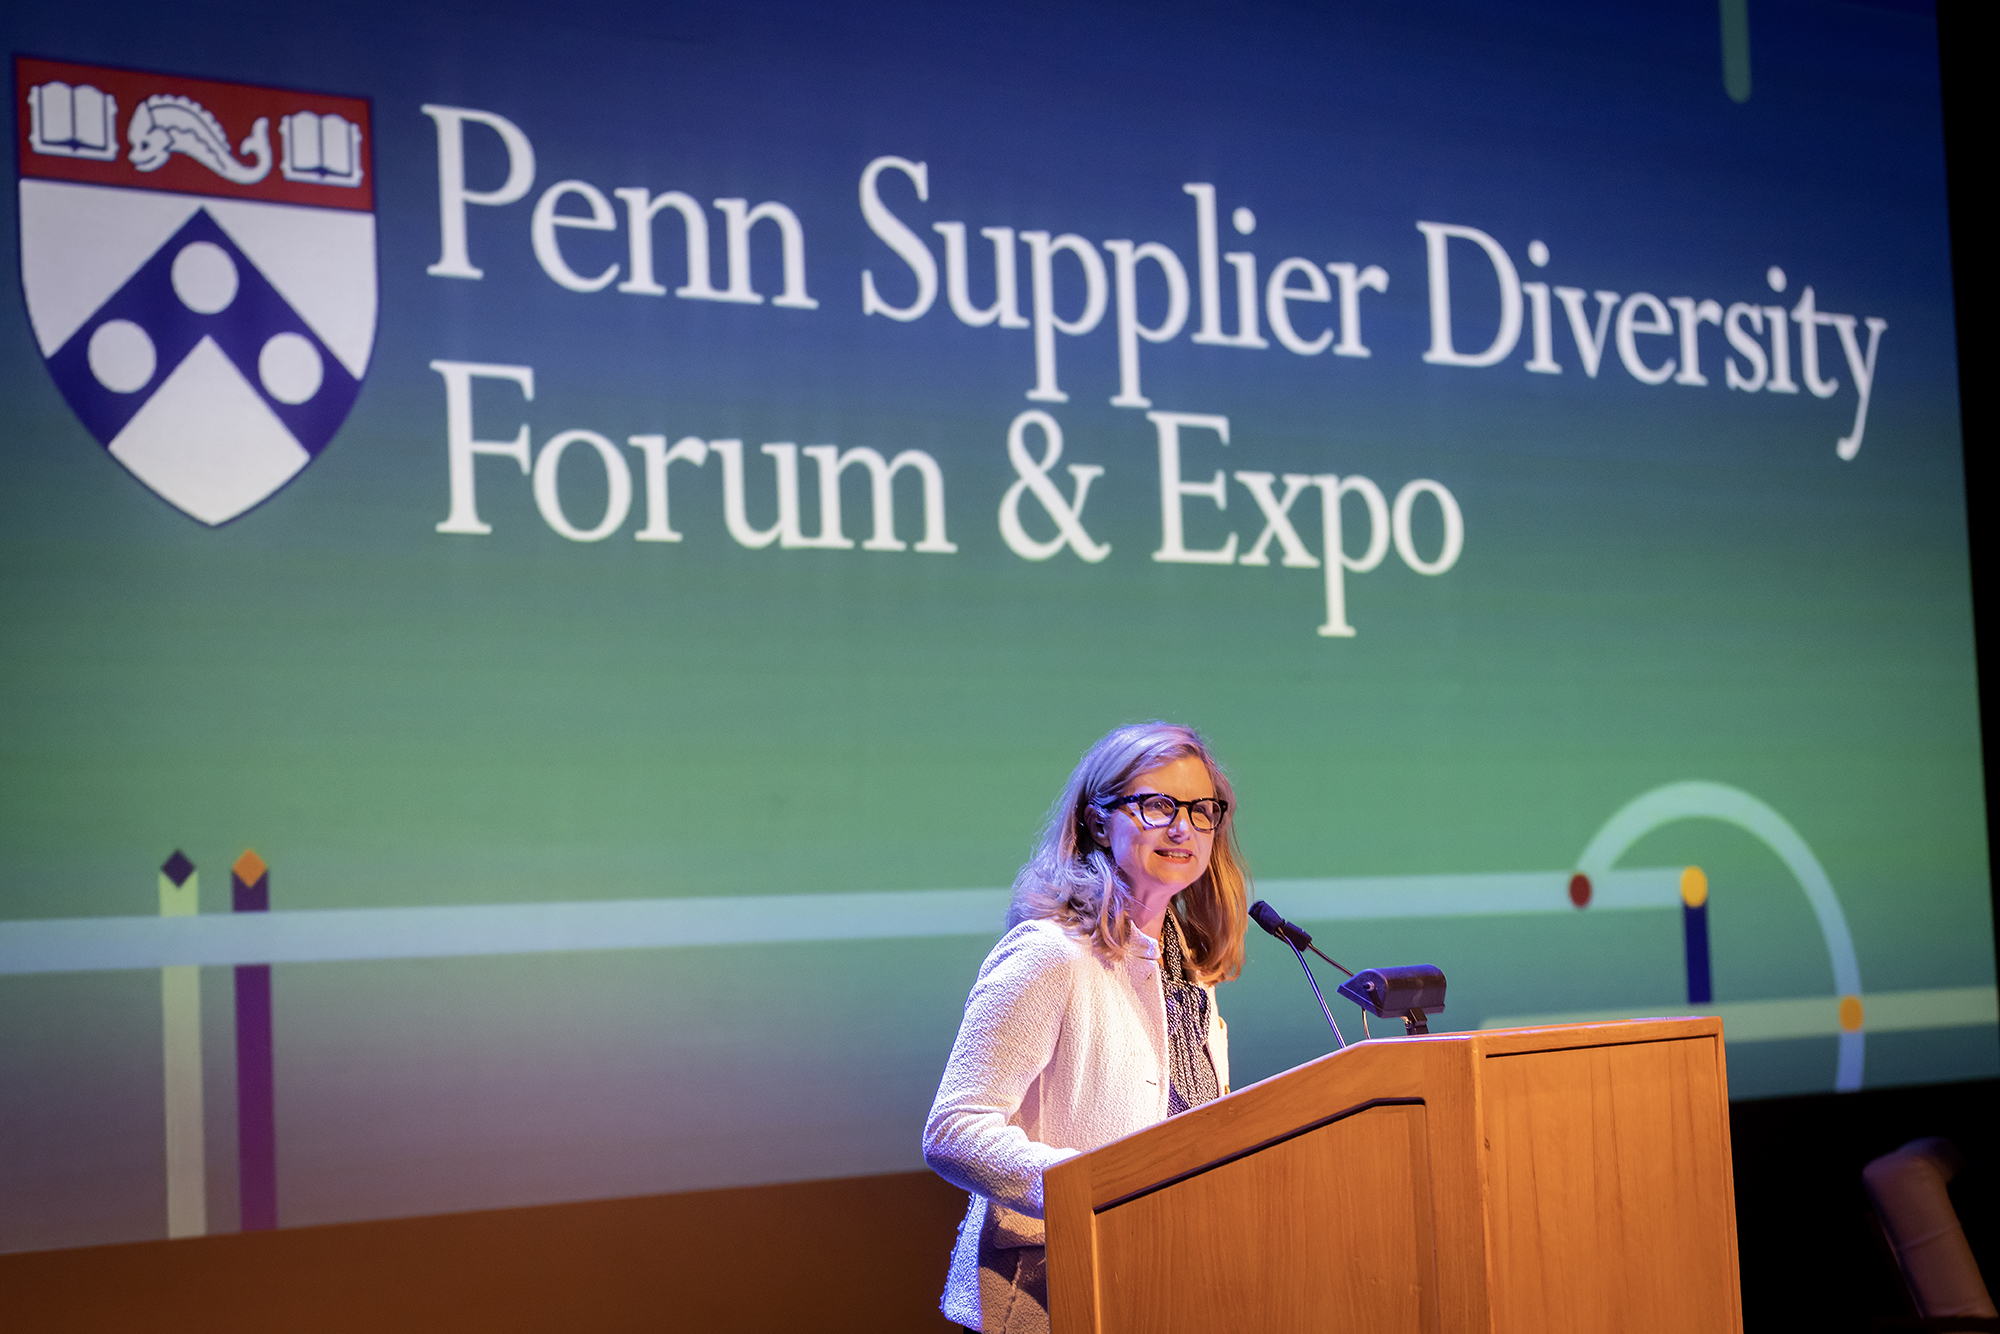 Liz Magill on stage at the Penn Supplier Diversity Forum & Expo.